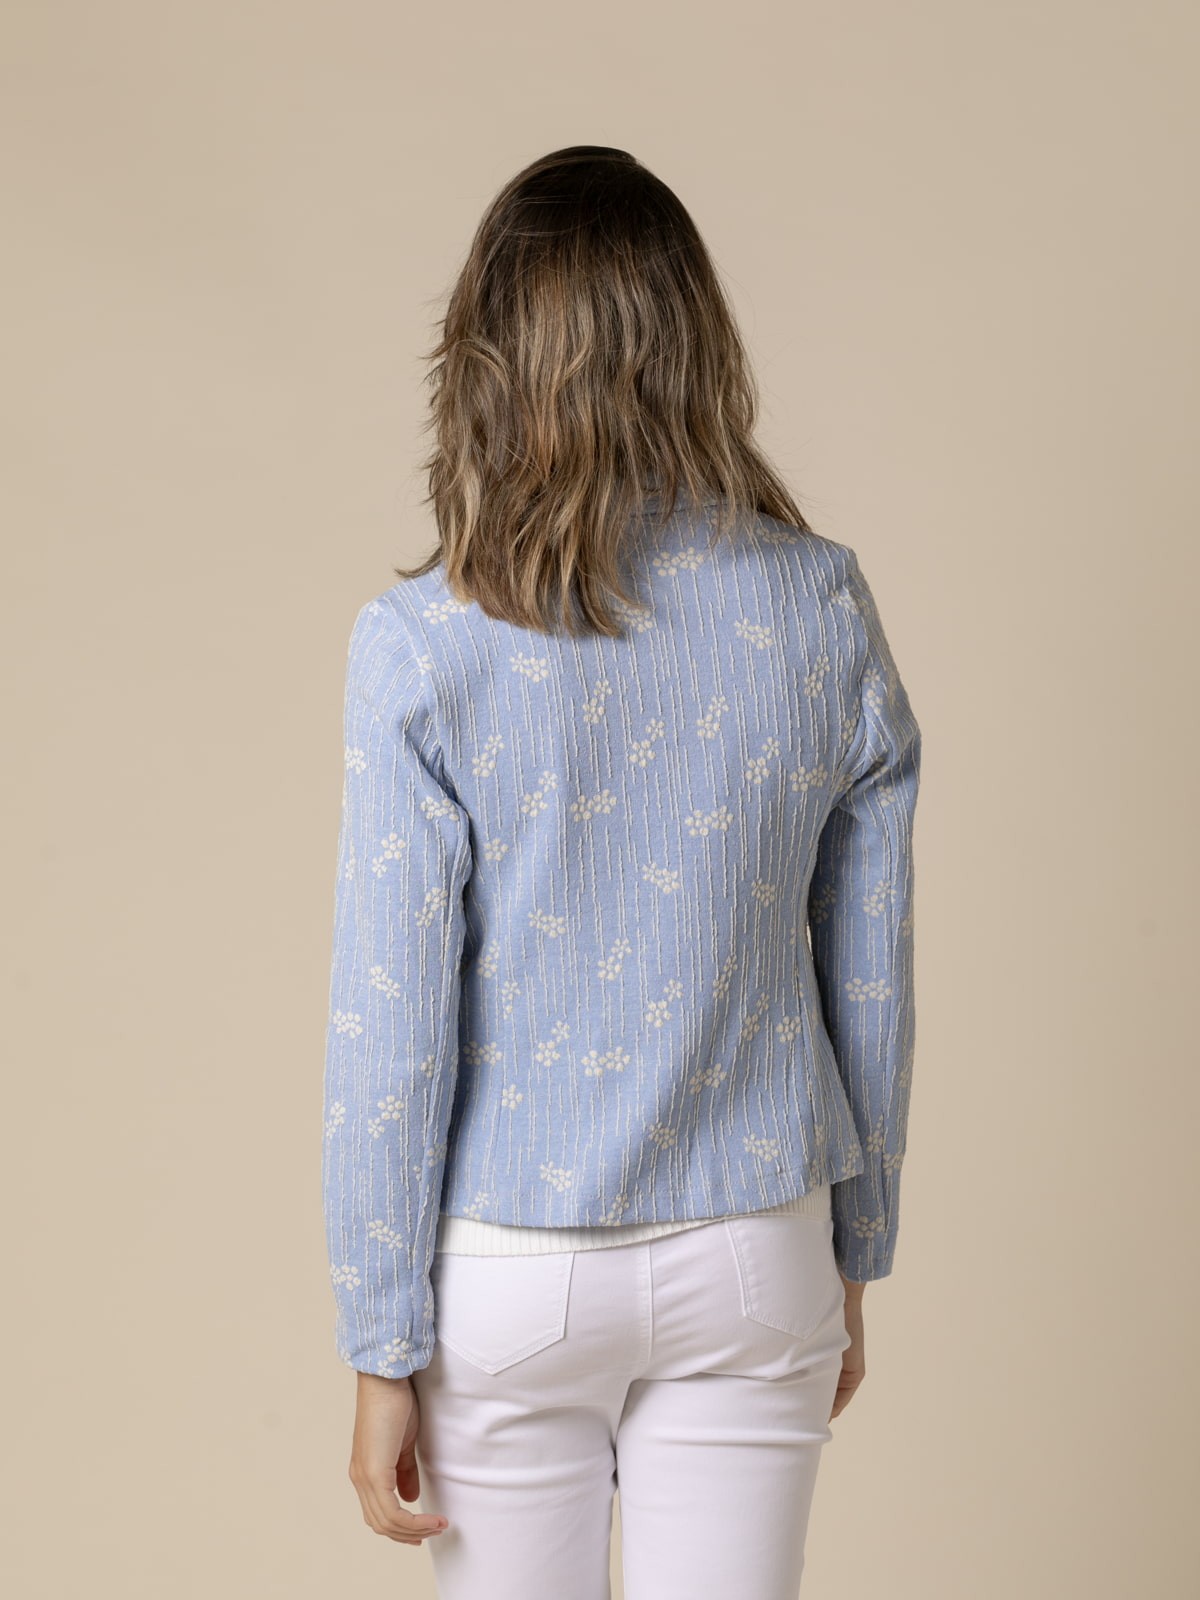 Woman Jacket embroidered with flowers and stripes  Bluecolour